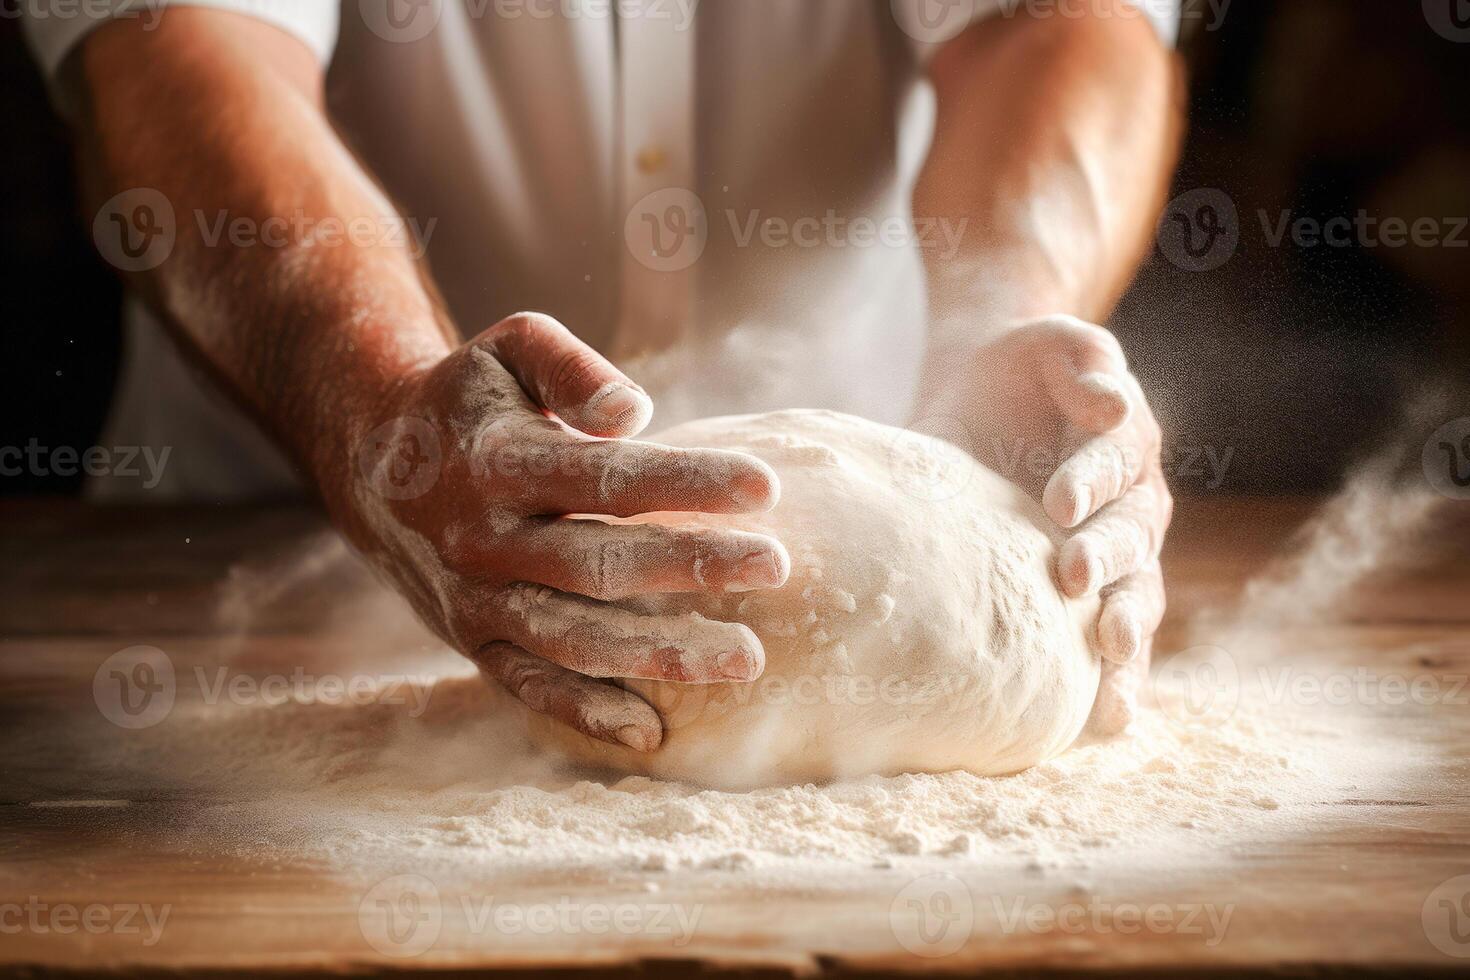 The chef's manly hands kneading the dough. photo